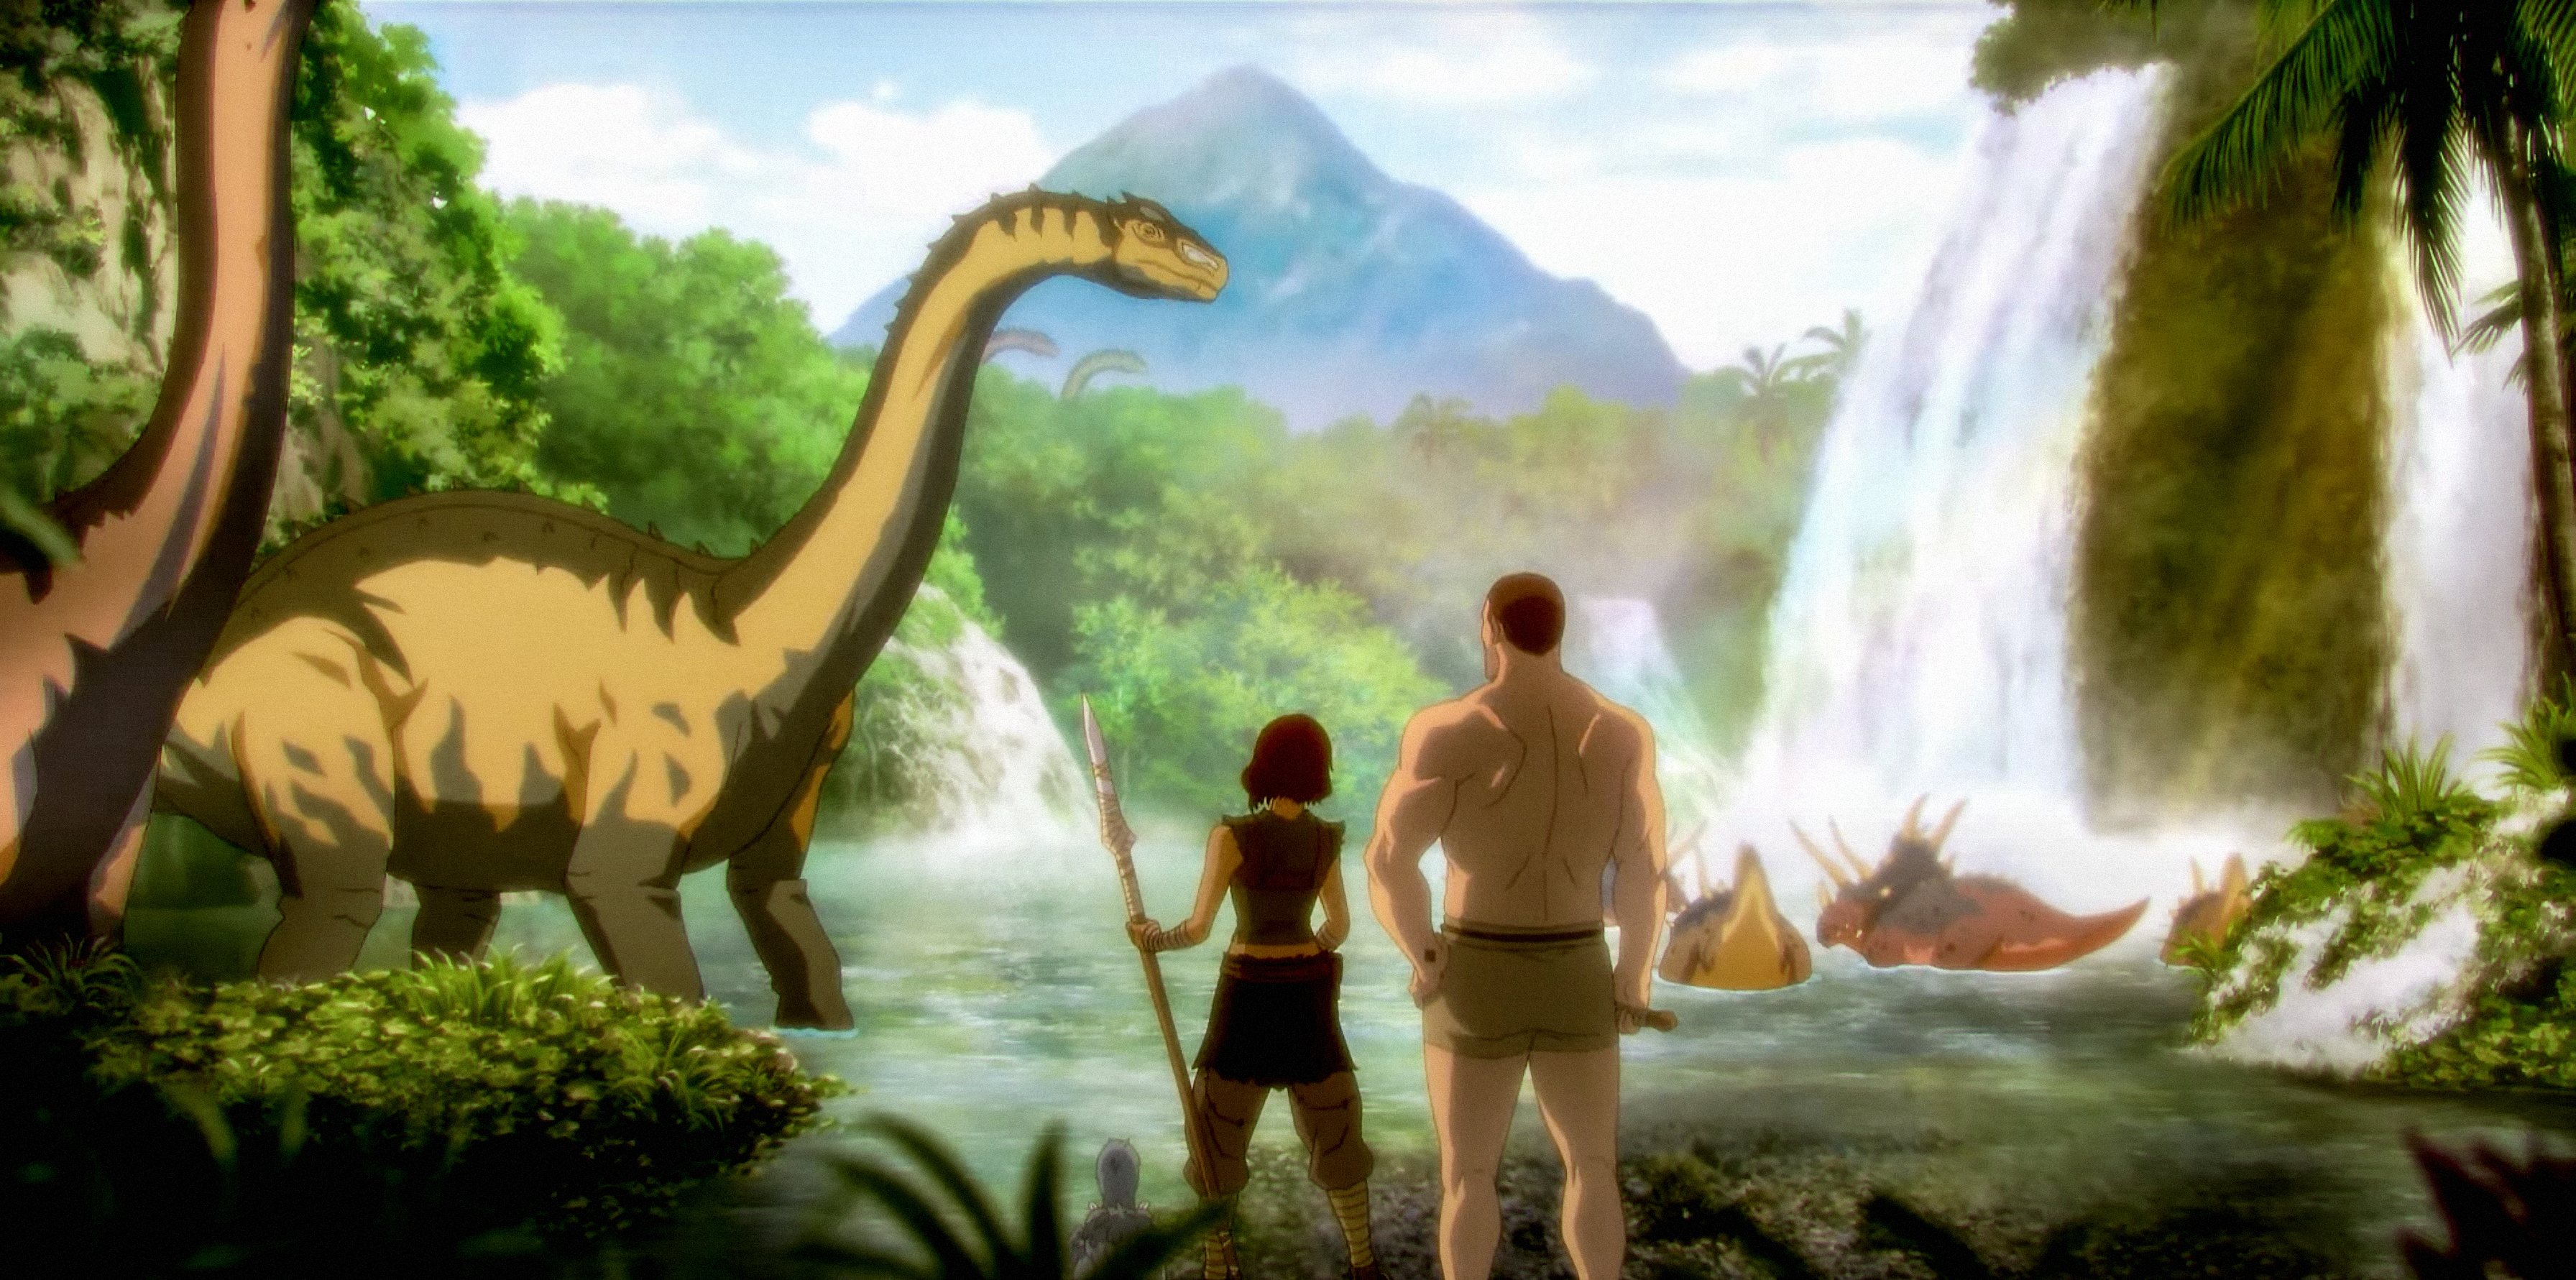 Need More Dinosaurs? Check Out the Trailer for ‘ARK: The Animated Series’!